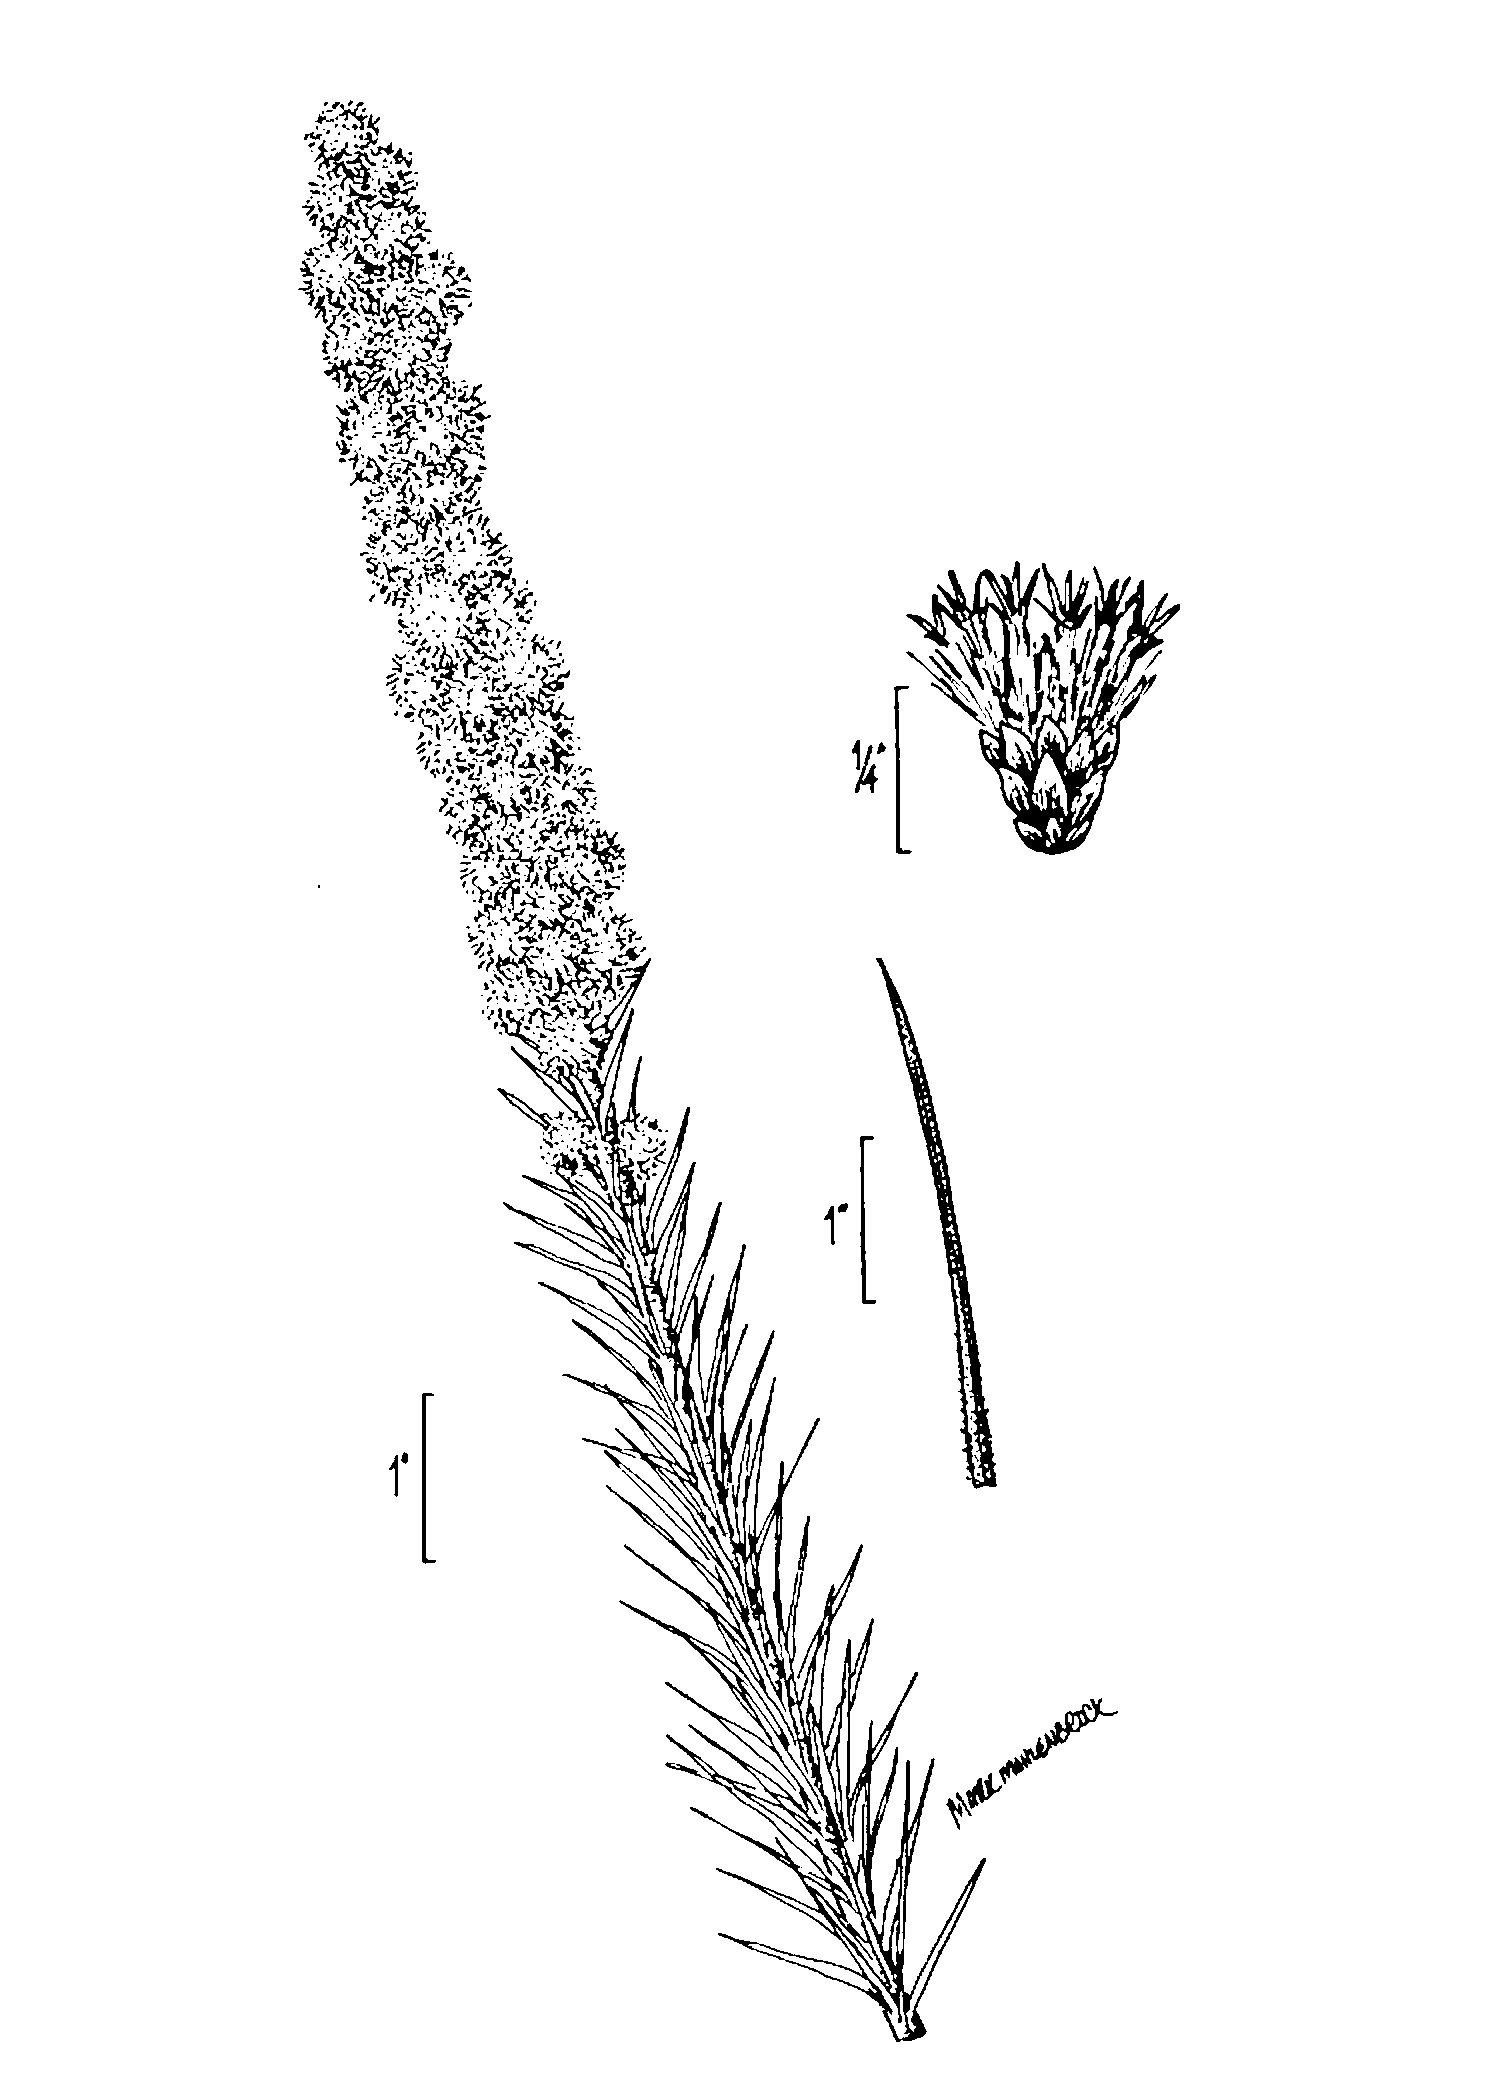 Prairie  Blazing Star botanical line drawing from USDA  NRCS, Wetland flora: Field office illustrated guide to plant species., USDA NRCS National Wetland Team.